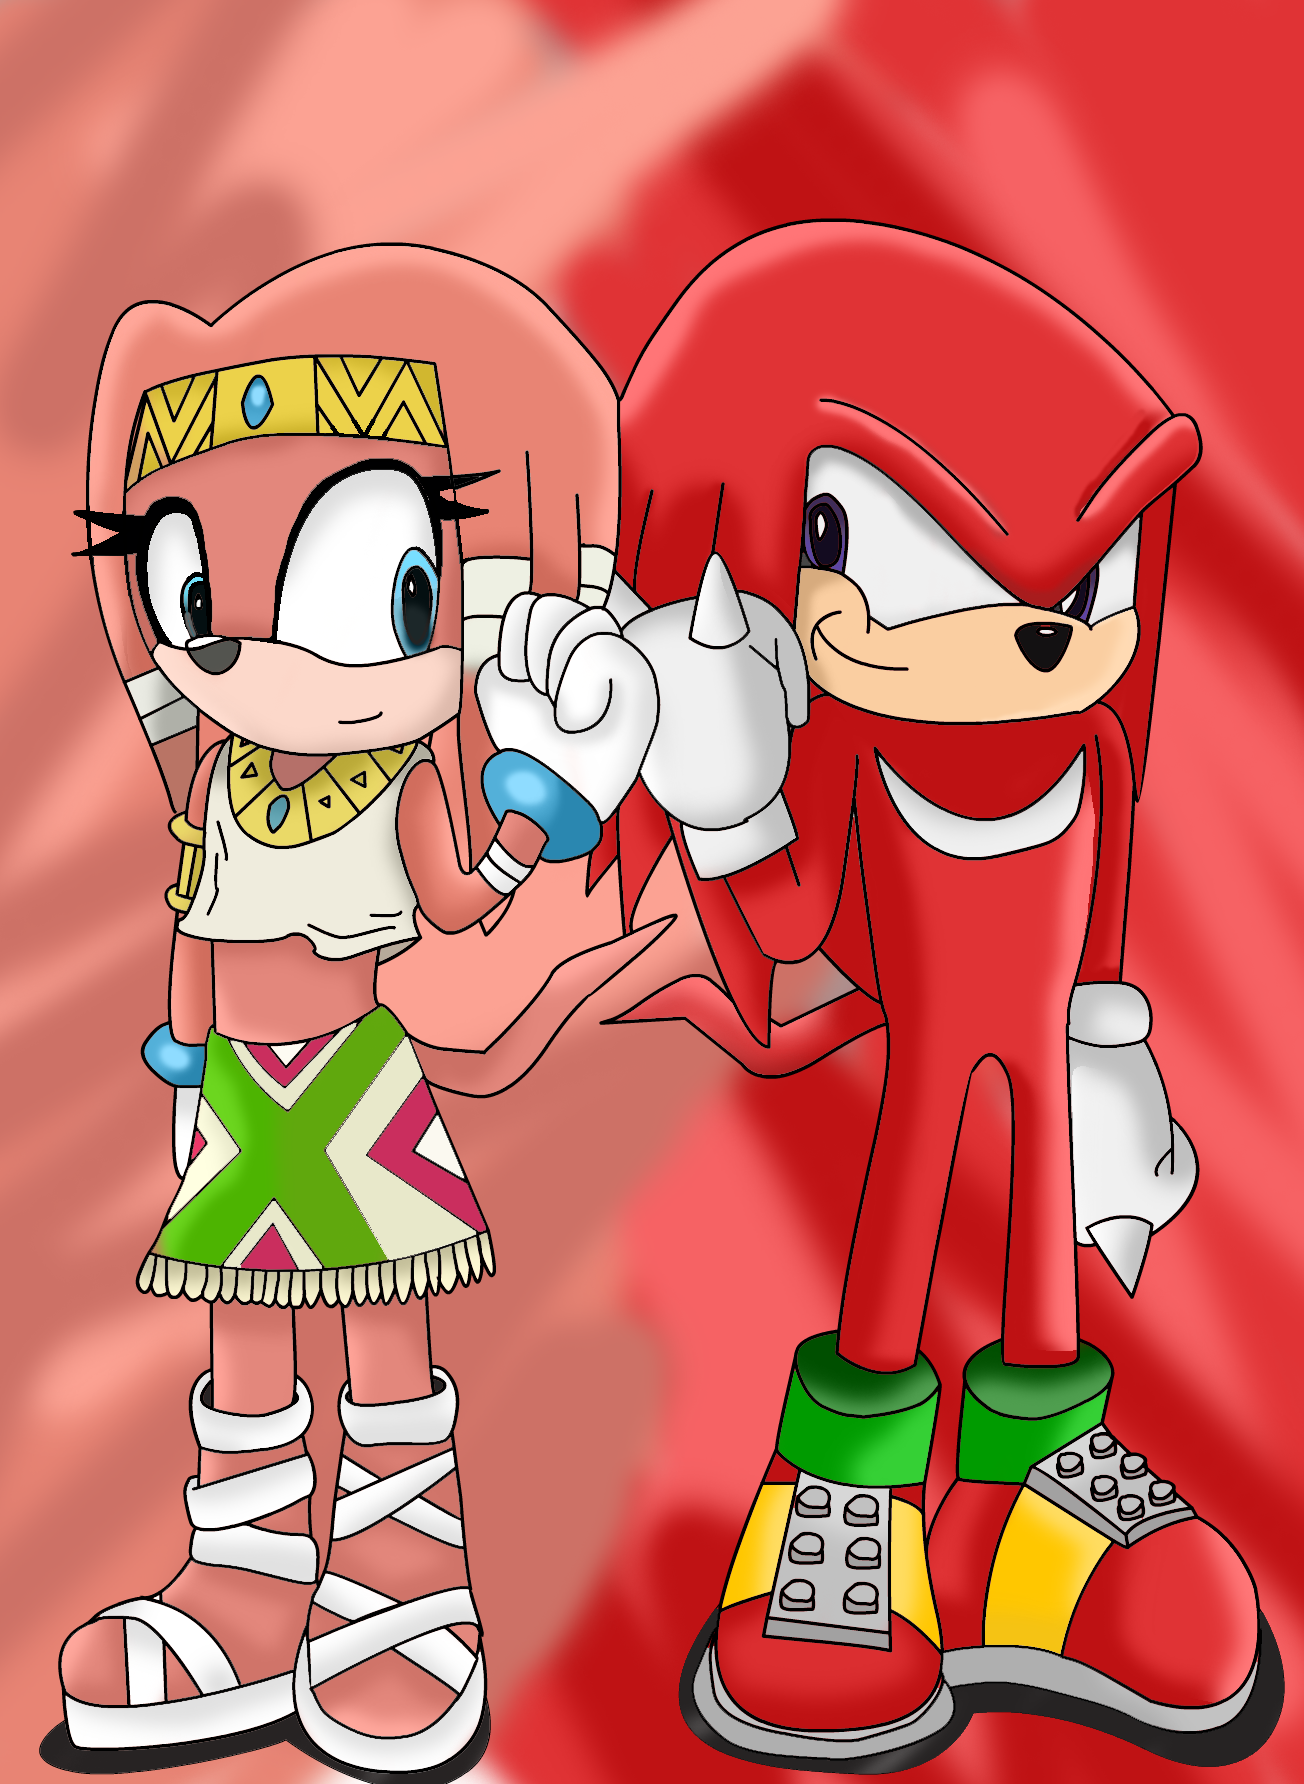 Knuckles Sonic and Shadow Girlfriends Images on Fanpop.